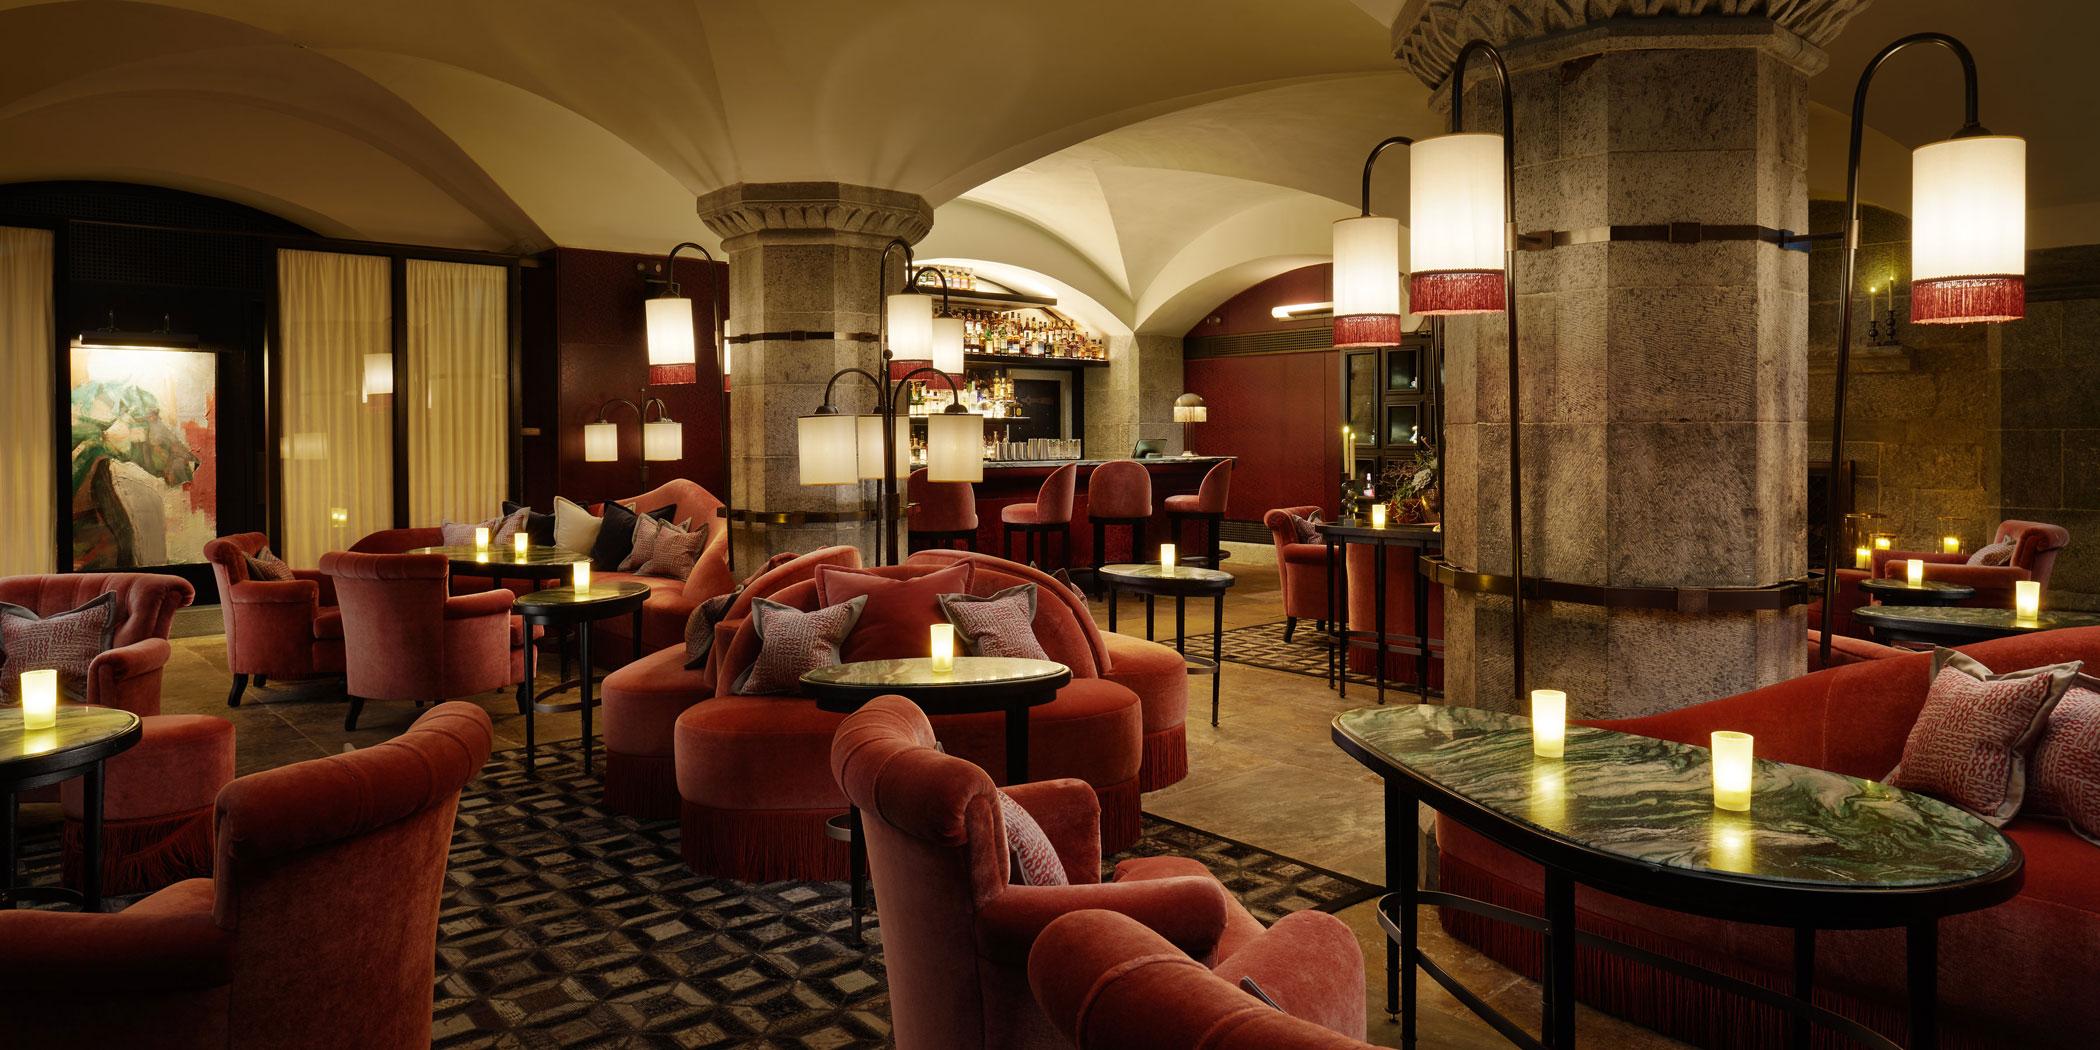 Ireland’s mid-19th century Adare Manor features a cozy new whiskey lounge called the Tack Room.